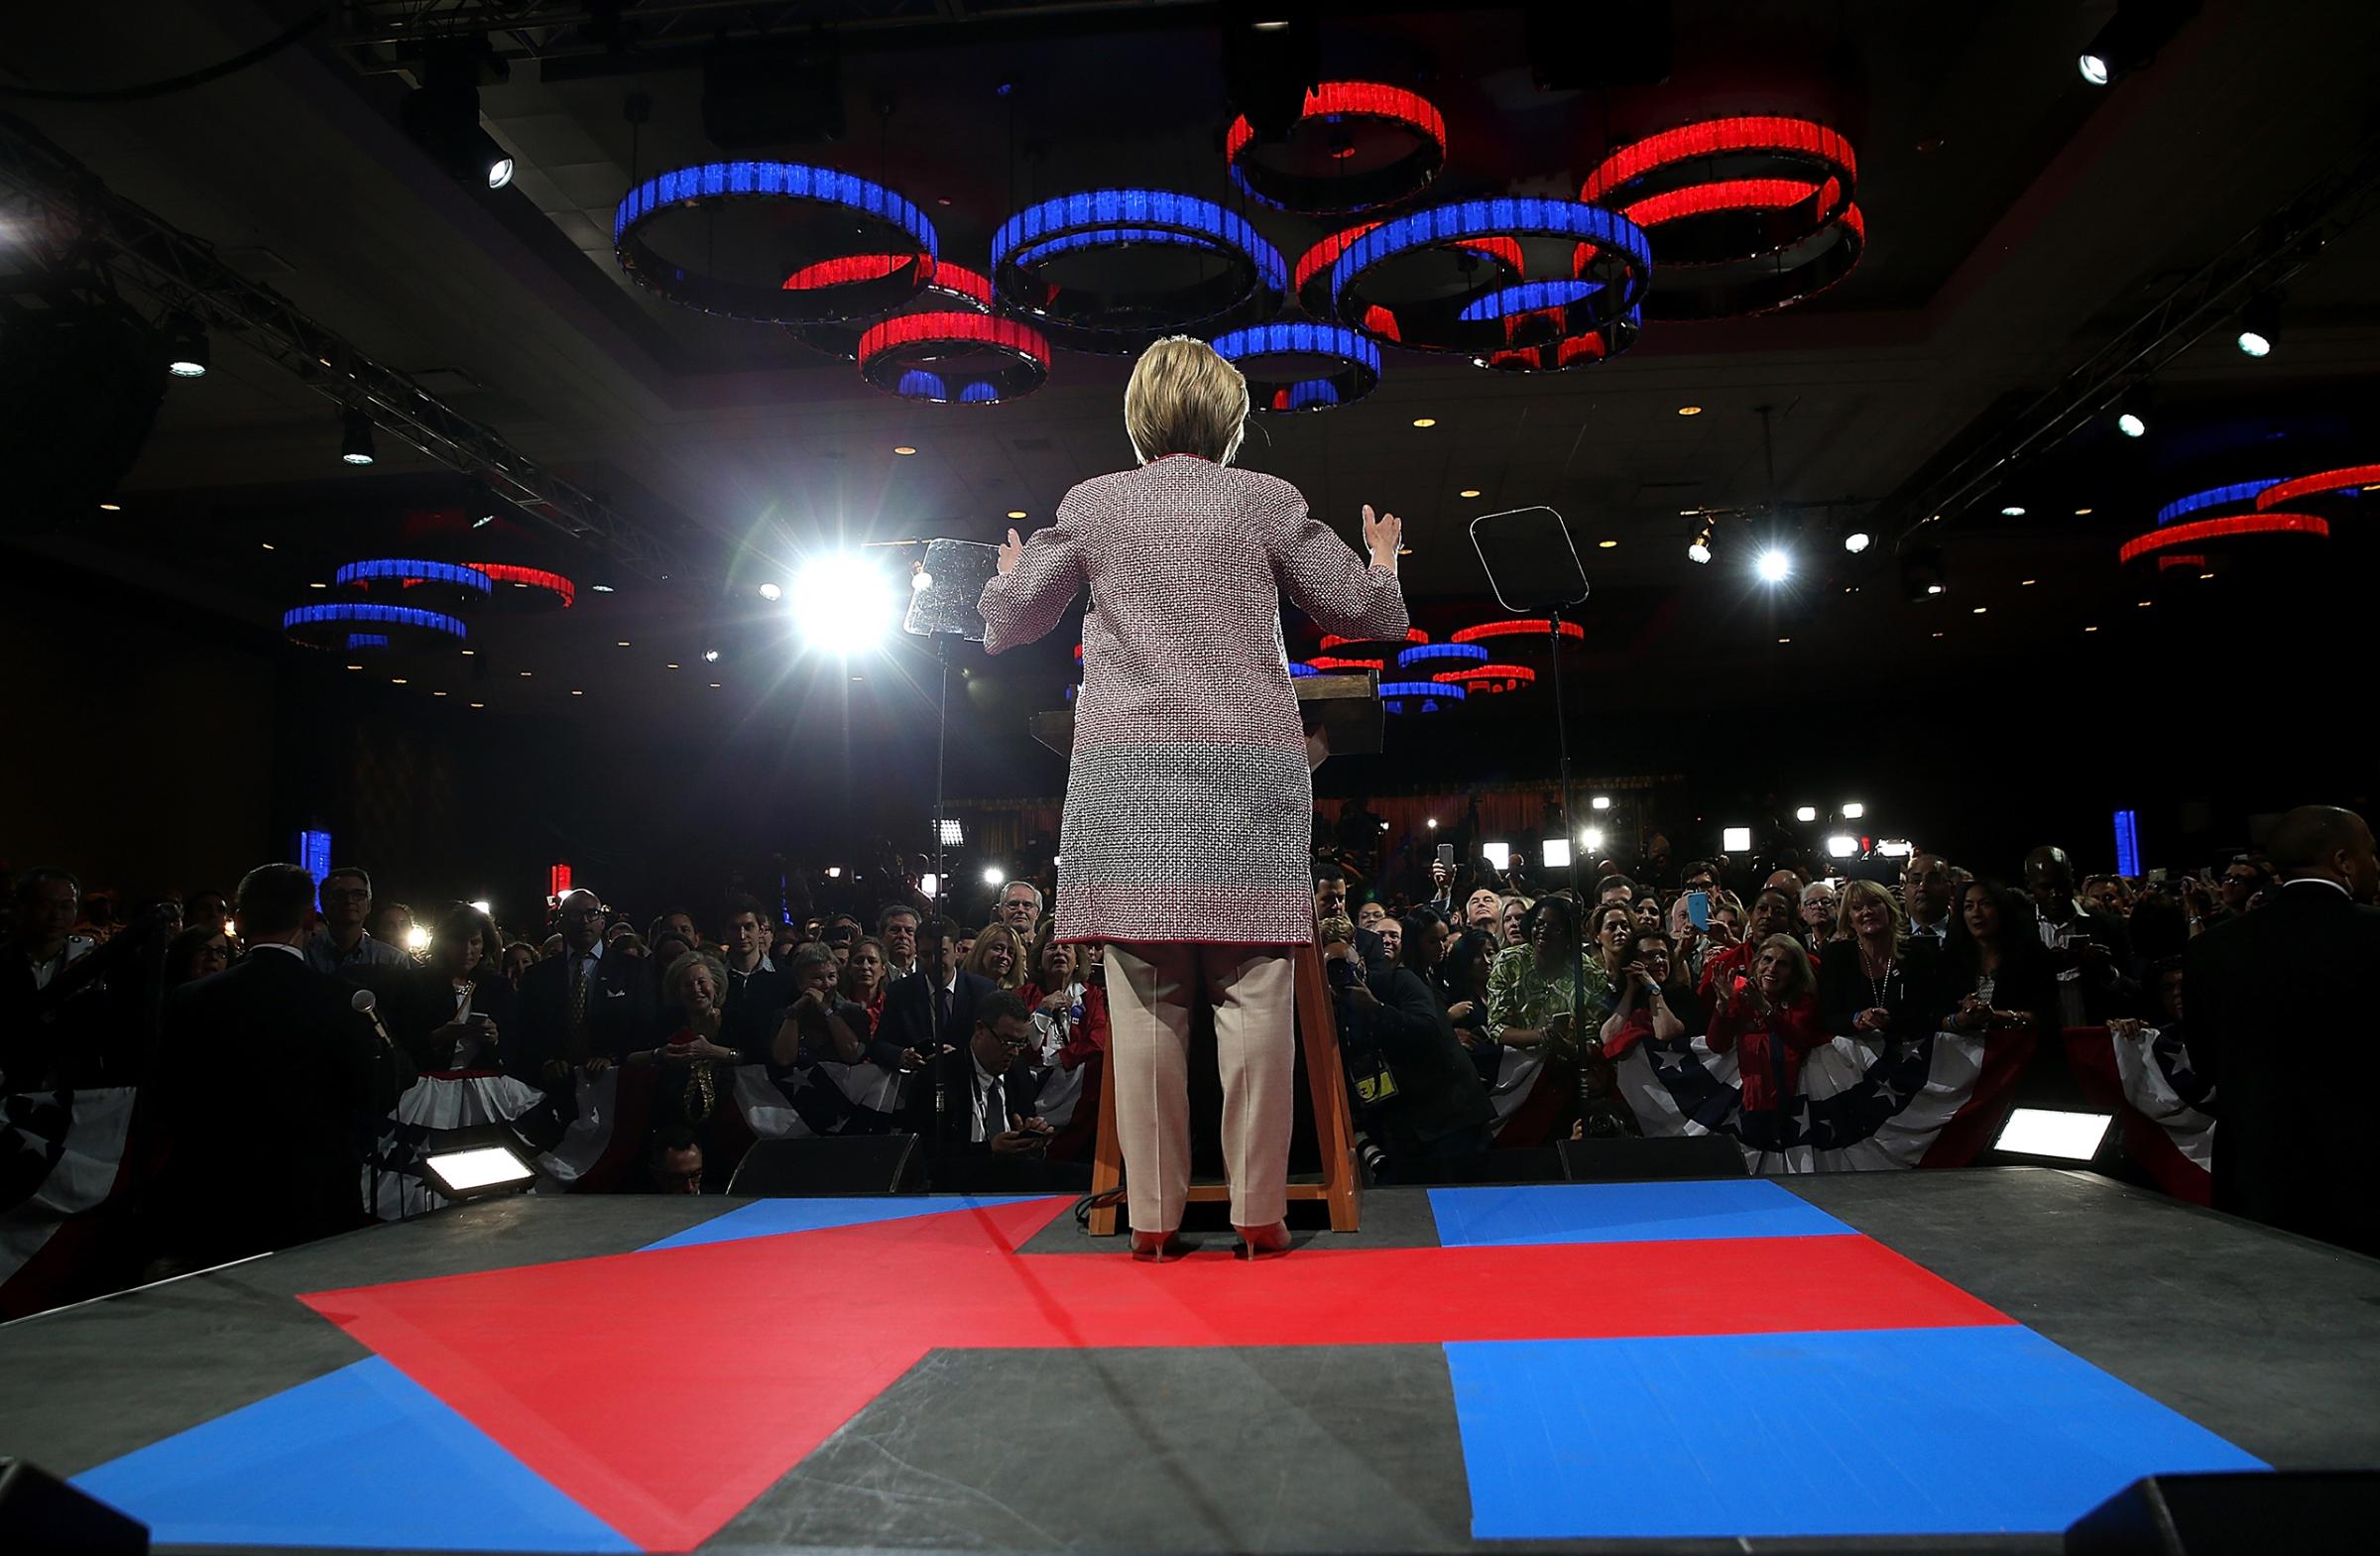 Hillary Clinton speaks during a primary election night gathering in New York City on April 19, 2016.